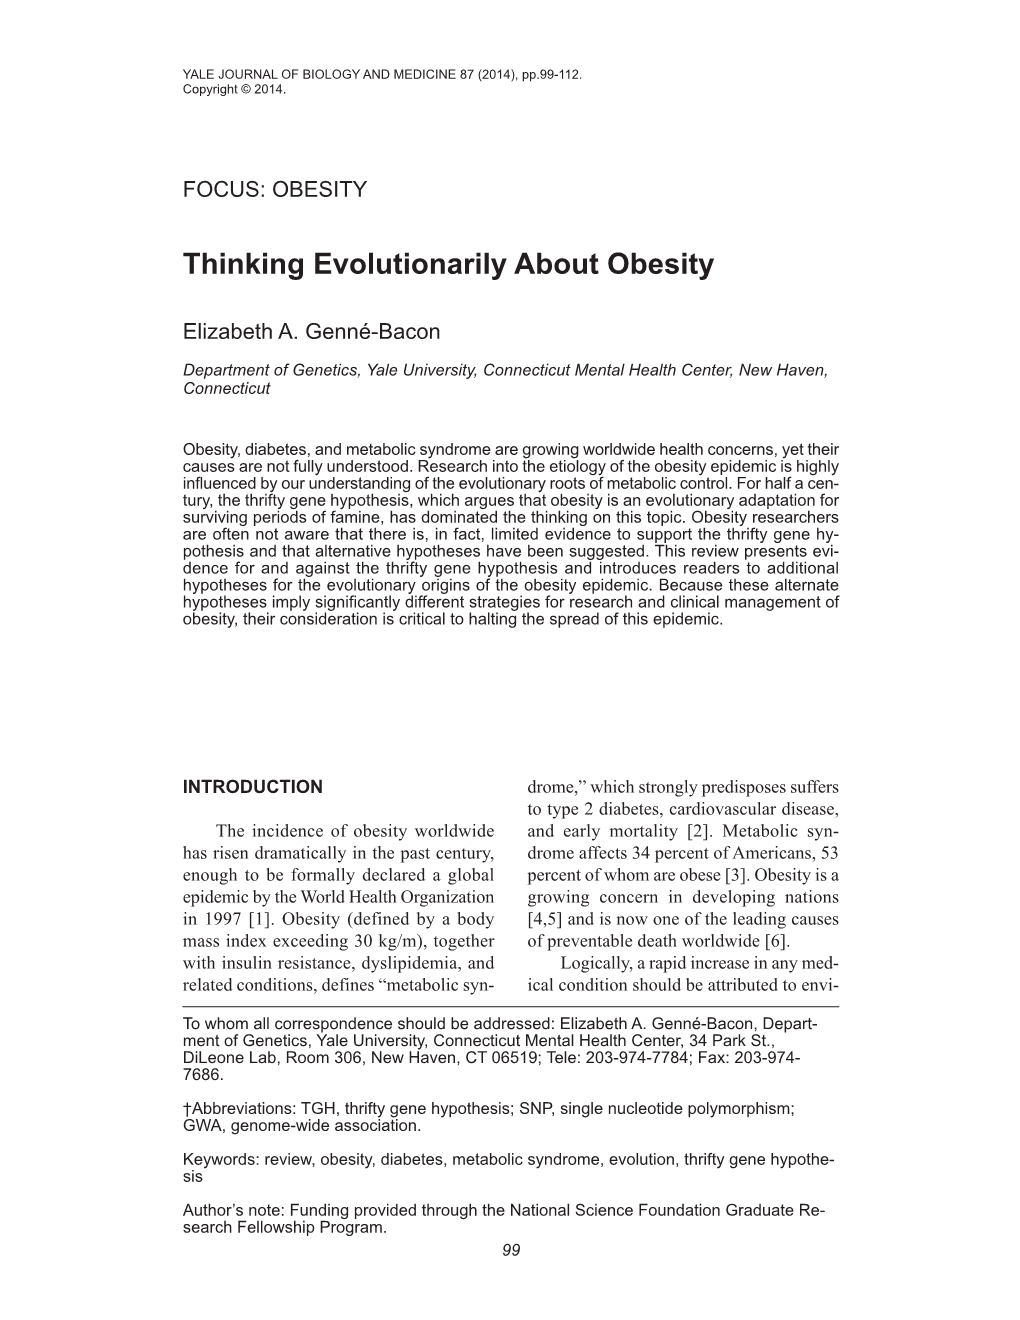 Genne-Bacon Thinking Evolutionarily About Obesity